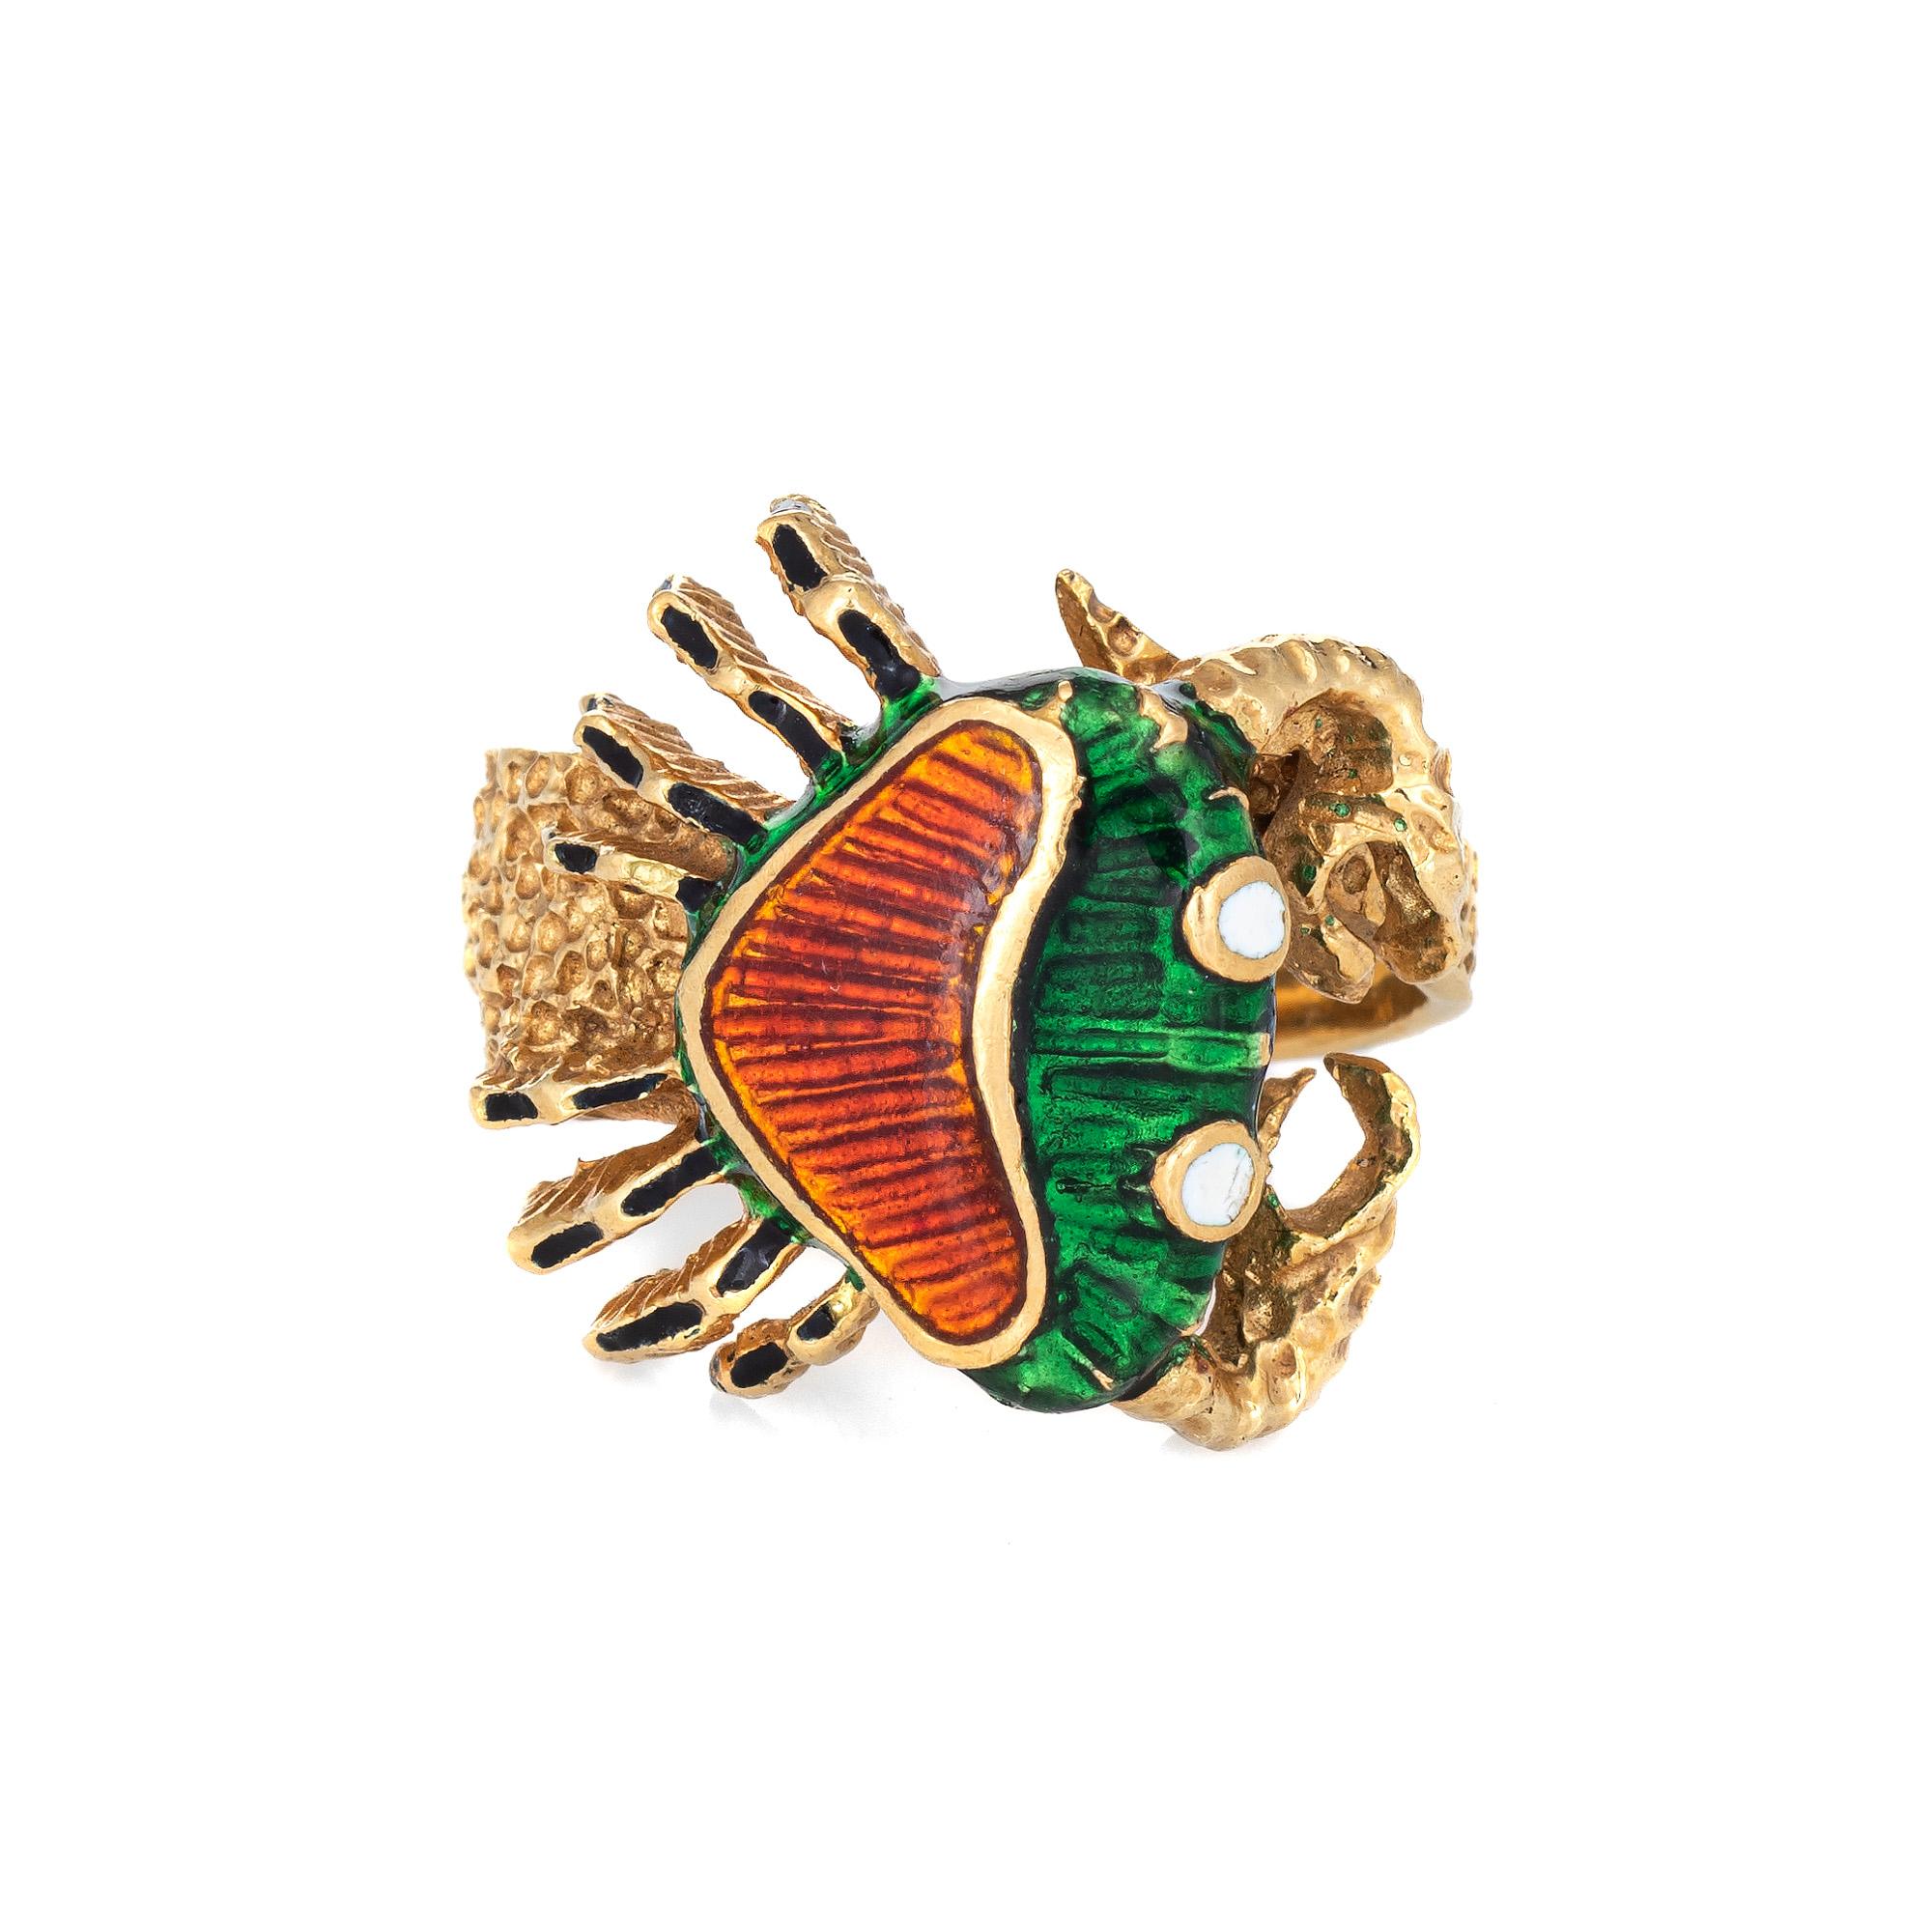 Stylish vintage enameled crab ring (circa 1970s to 1980s) crafted in 18 karat yellow gold. 

Enamel in shades of green, orange, white and black adorn the mount. The enamel is in very good condition and free of cracks or chips.

The finely detailed